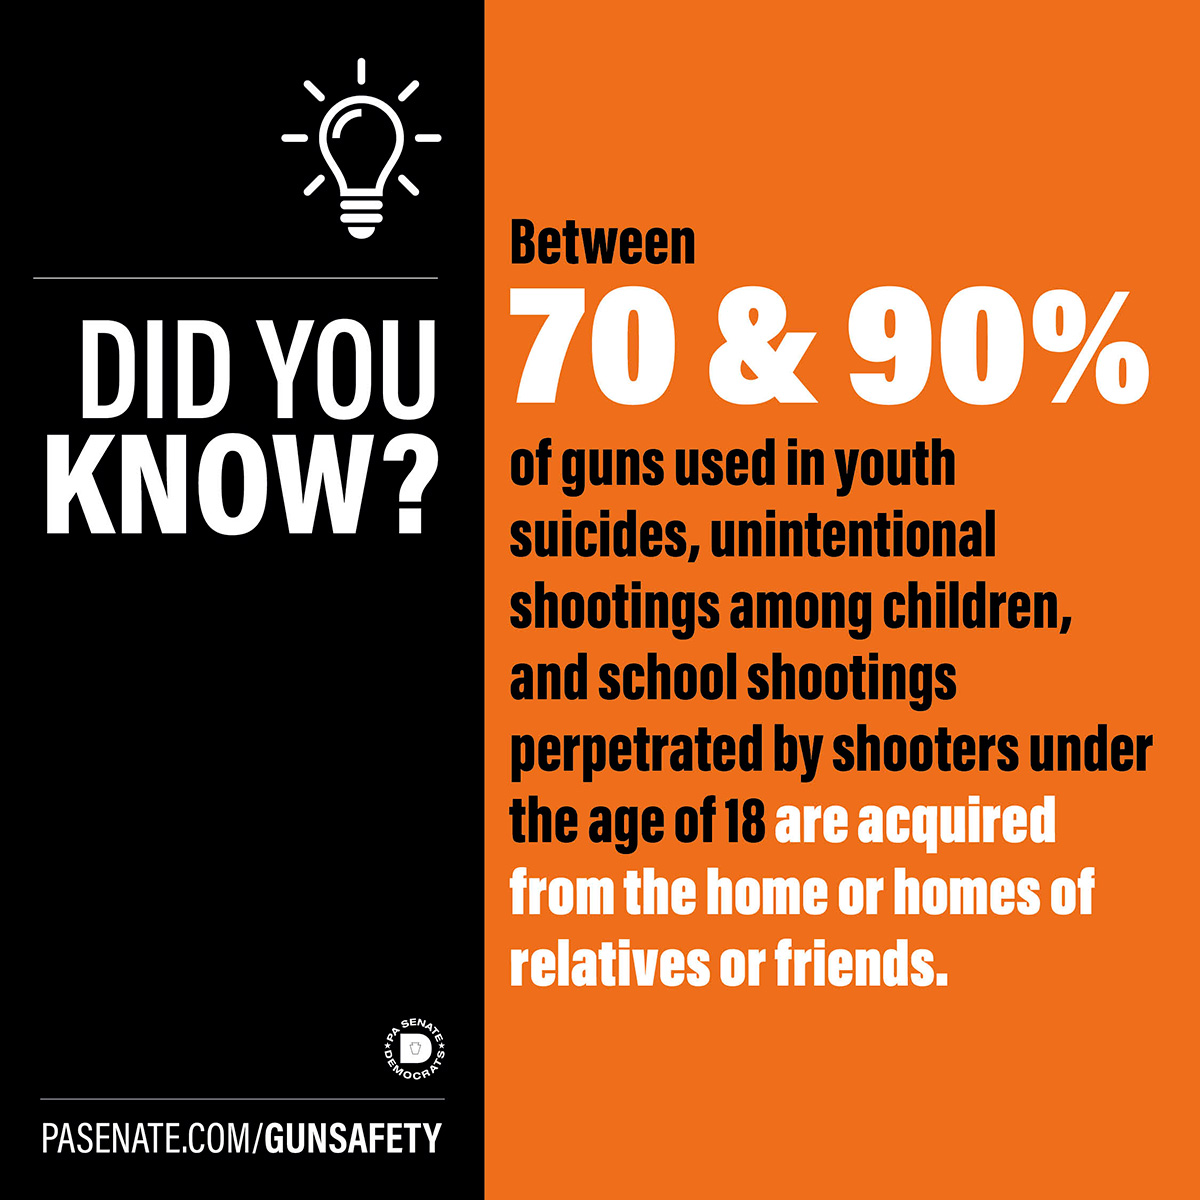 Did you know? Between 70% and 90% of guns used in youth suicides, unintentional shooting among children, and school shootings perpetrated by shooters under the are of 18 are acquired from the home or homes of relatives or friends.